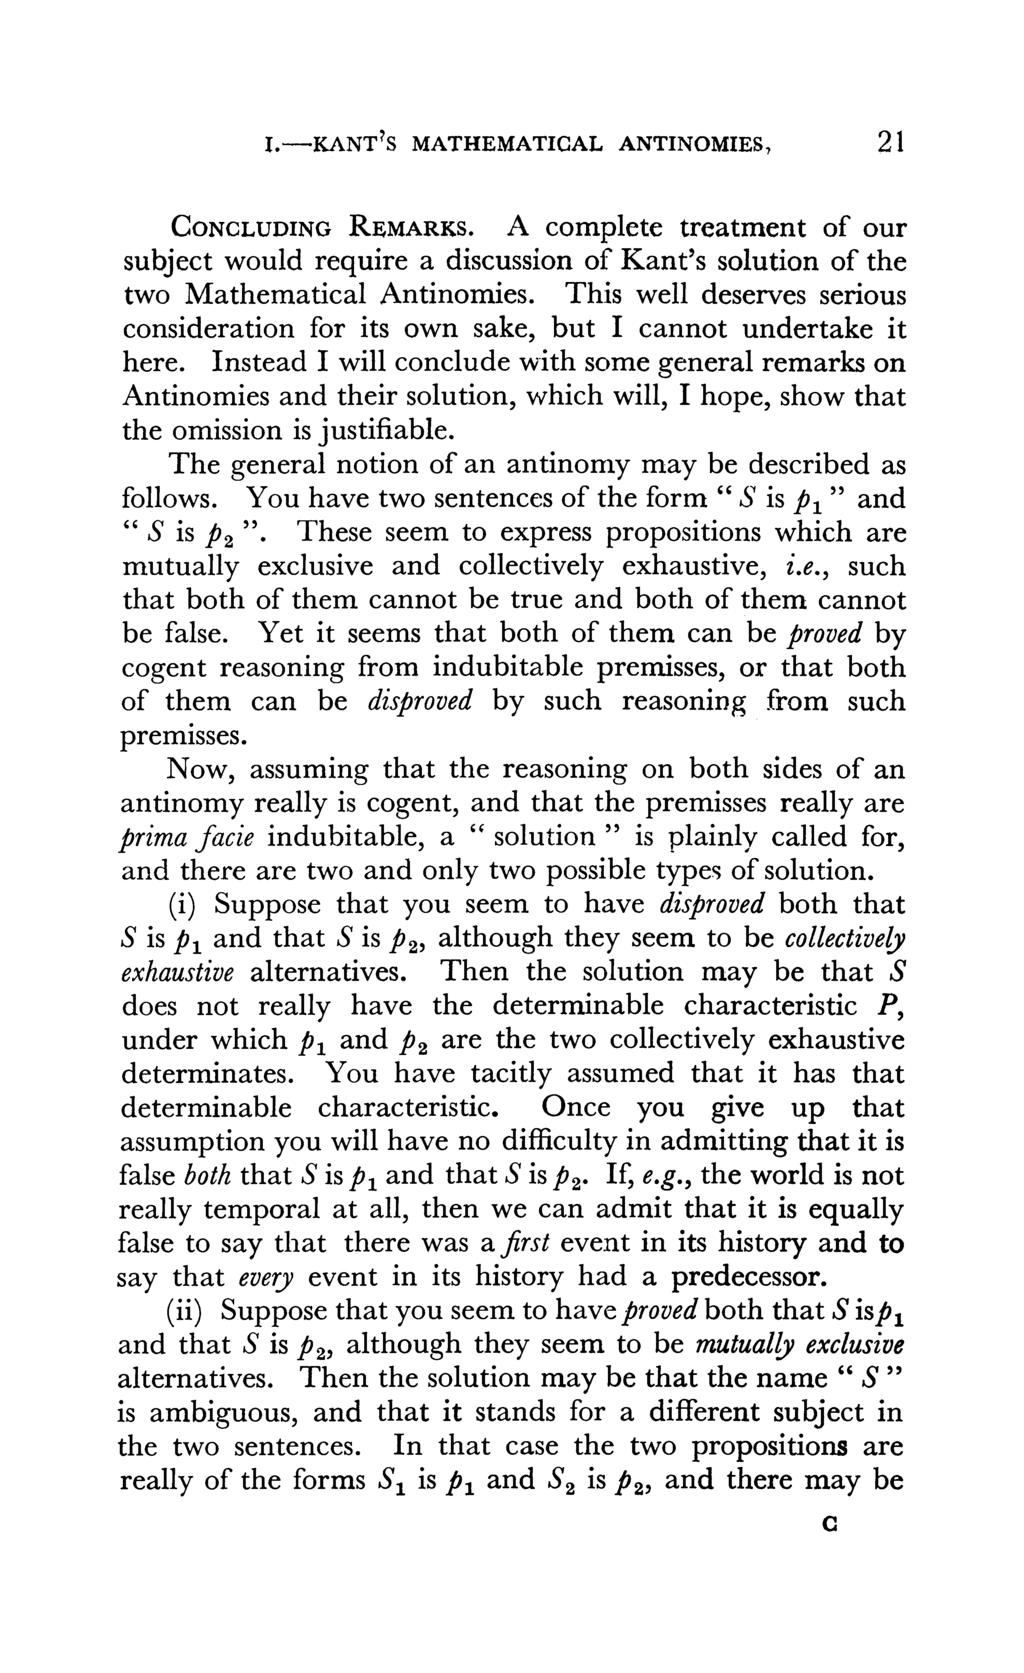 I.-KANT7S MATHEMATICAL ANTINOMIES, 21 CONCLUDING REMARKS. A complete treatment of our subject would require a discussion of Kant's solution of the two Mathematical Antinomies.